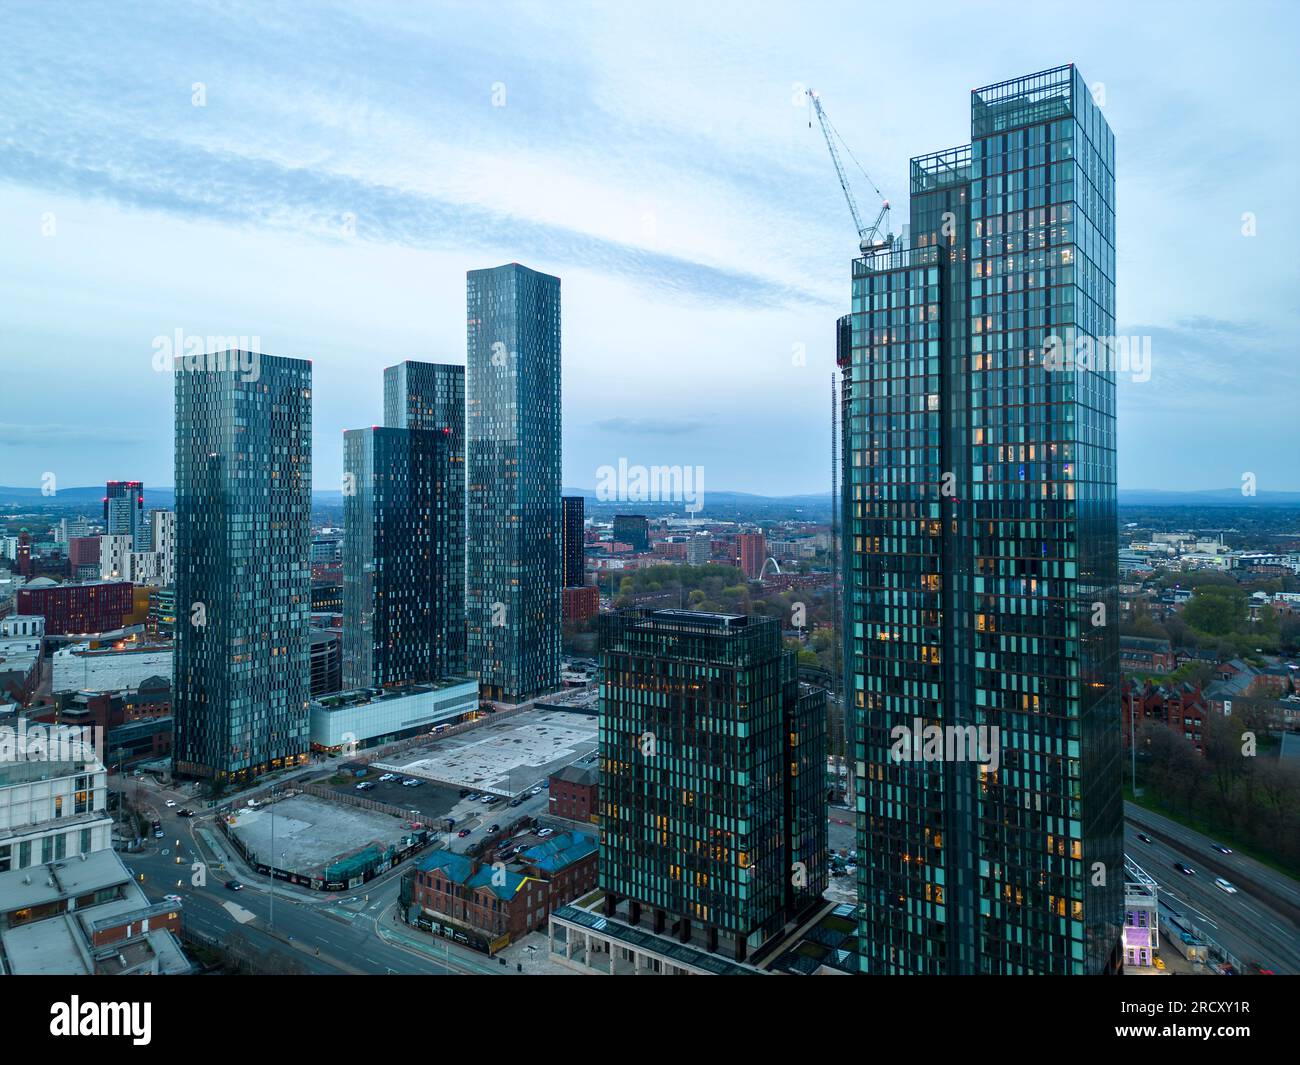 Deansgate Square towers and Elizabeth Tower at night, Manchester city centre, England Stock Photo